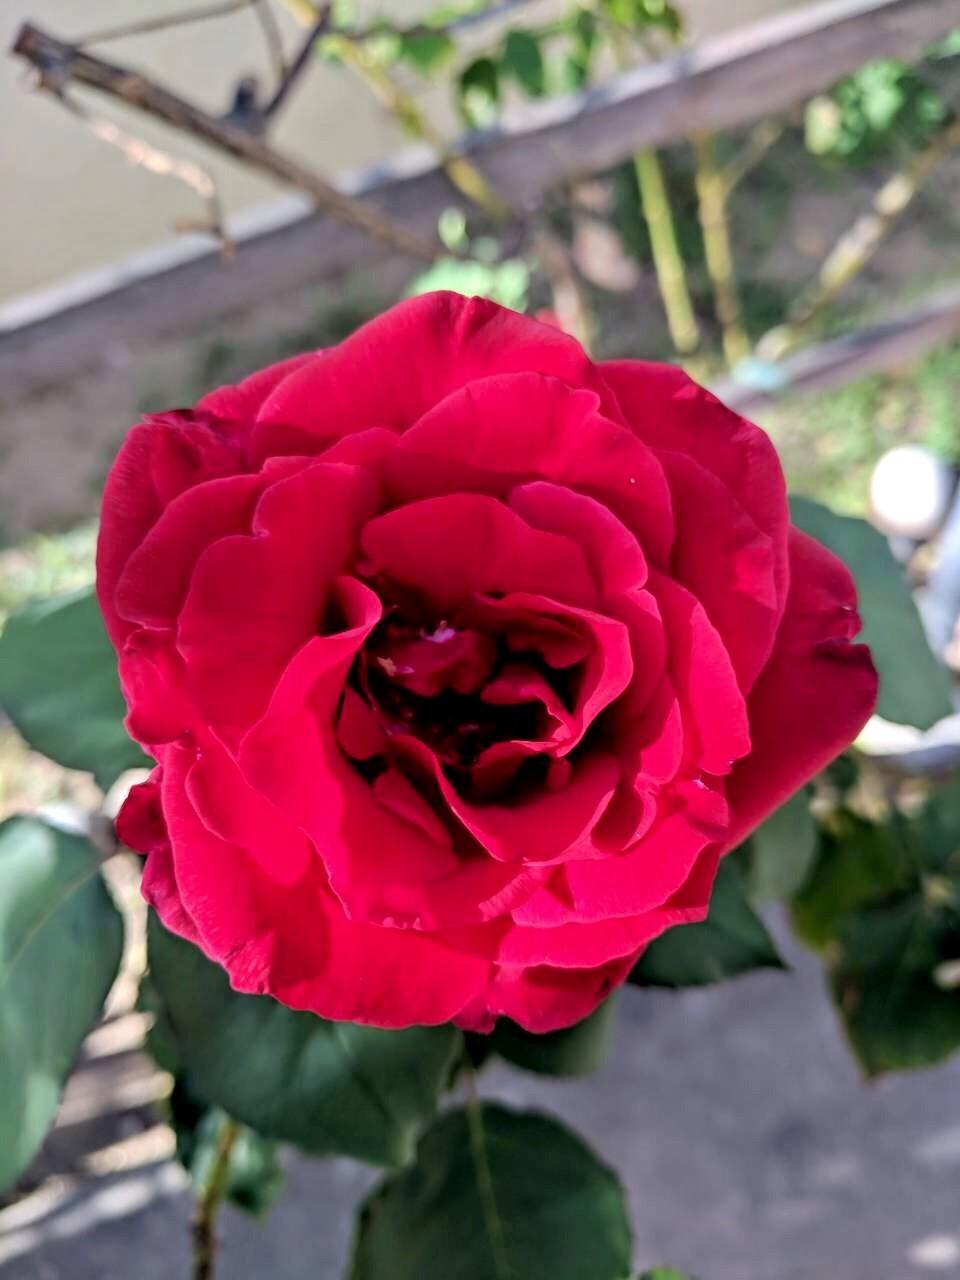 granddaughter. In the meantime, my husband has sent me pictures of the second bloom of our Mr Lincoln -which must mean that New Mexican temperatures are cooling.